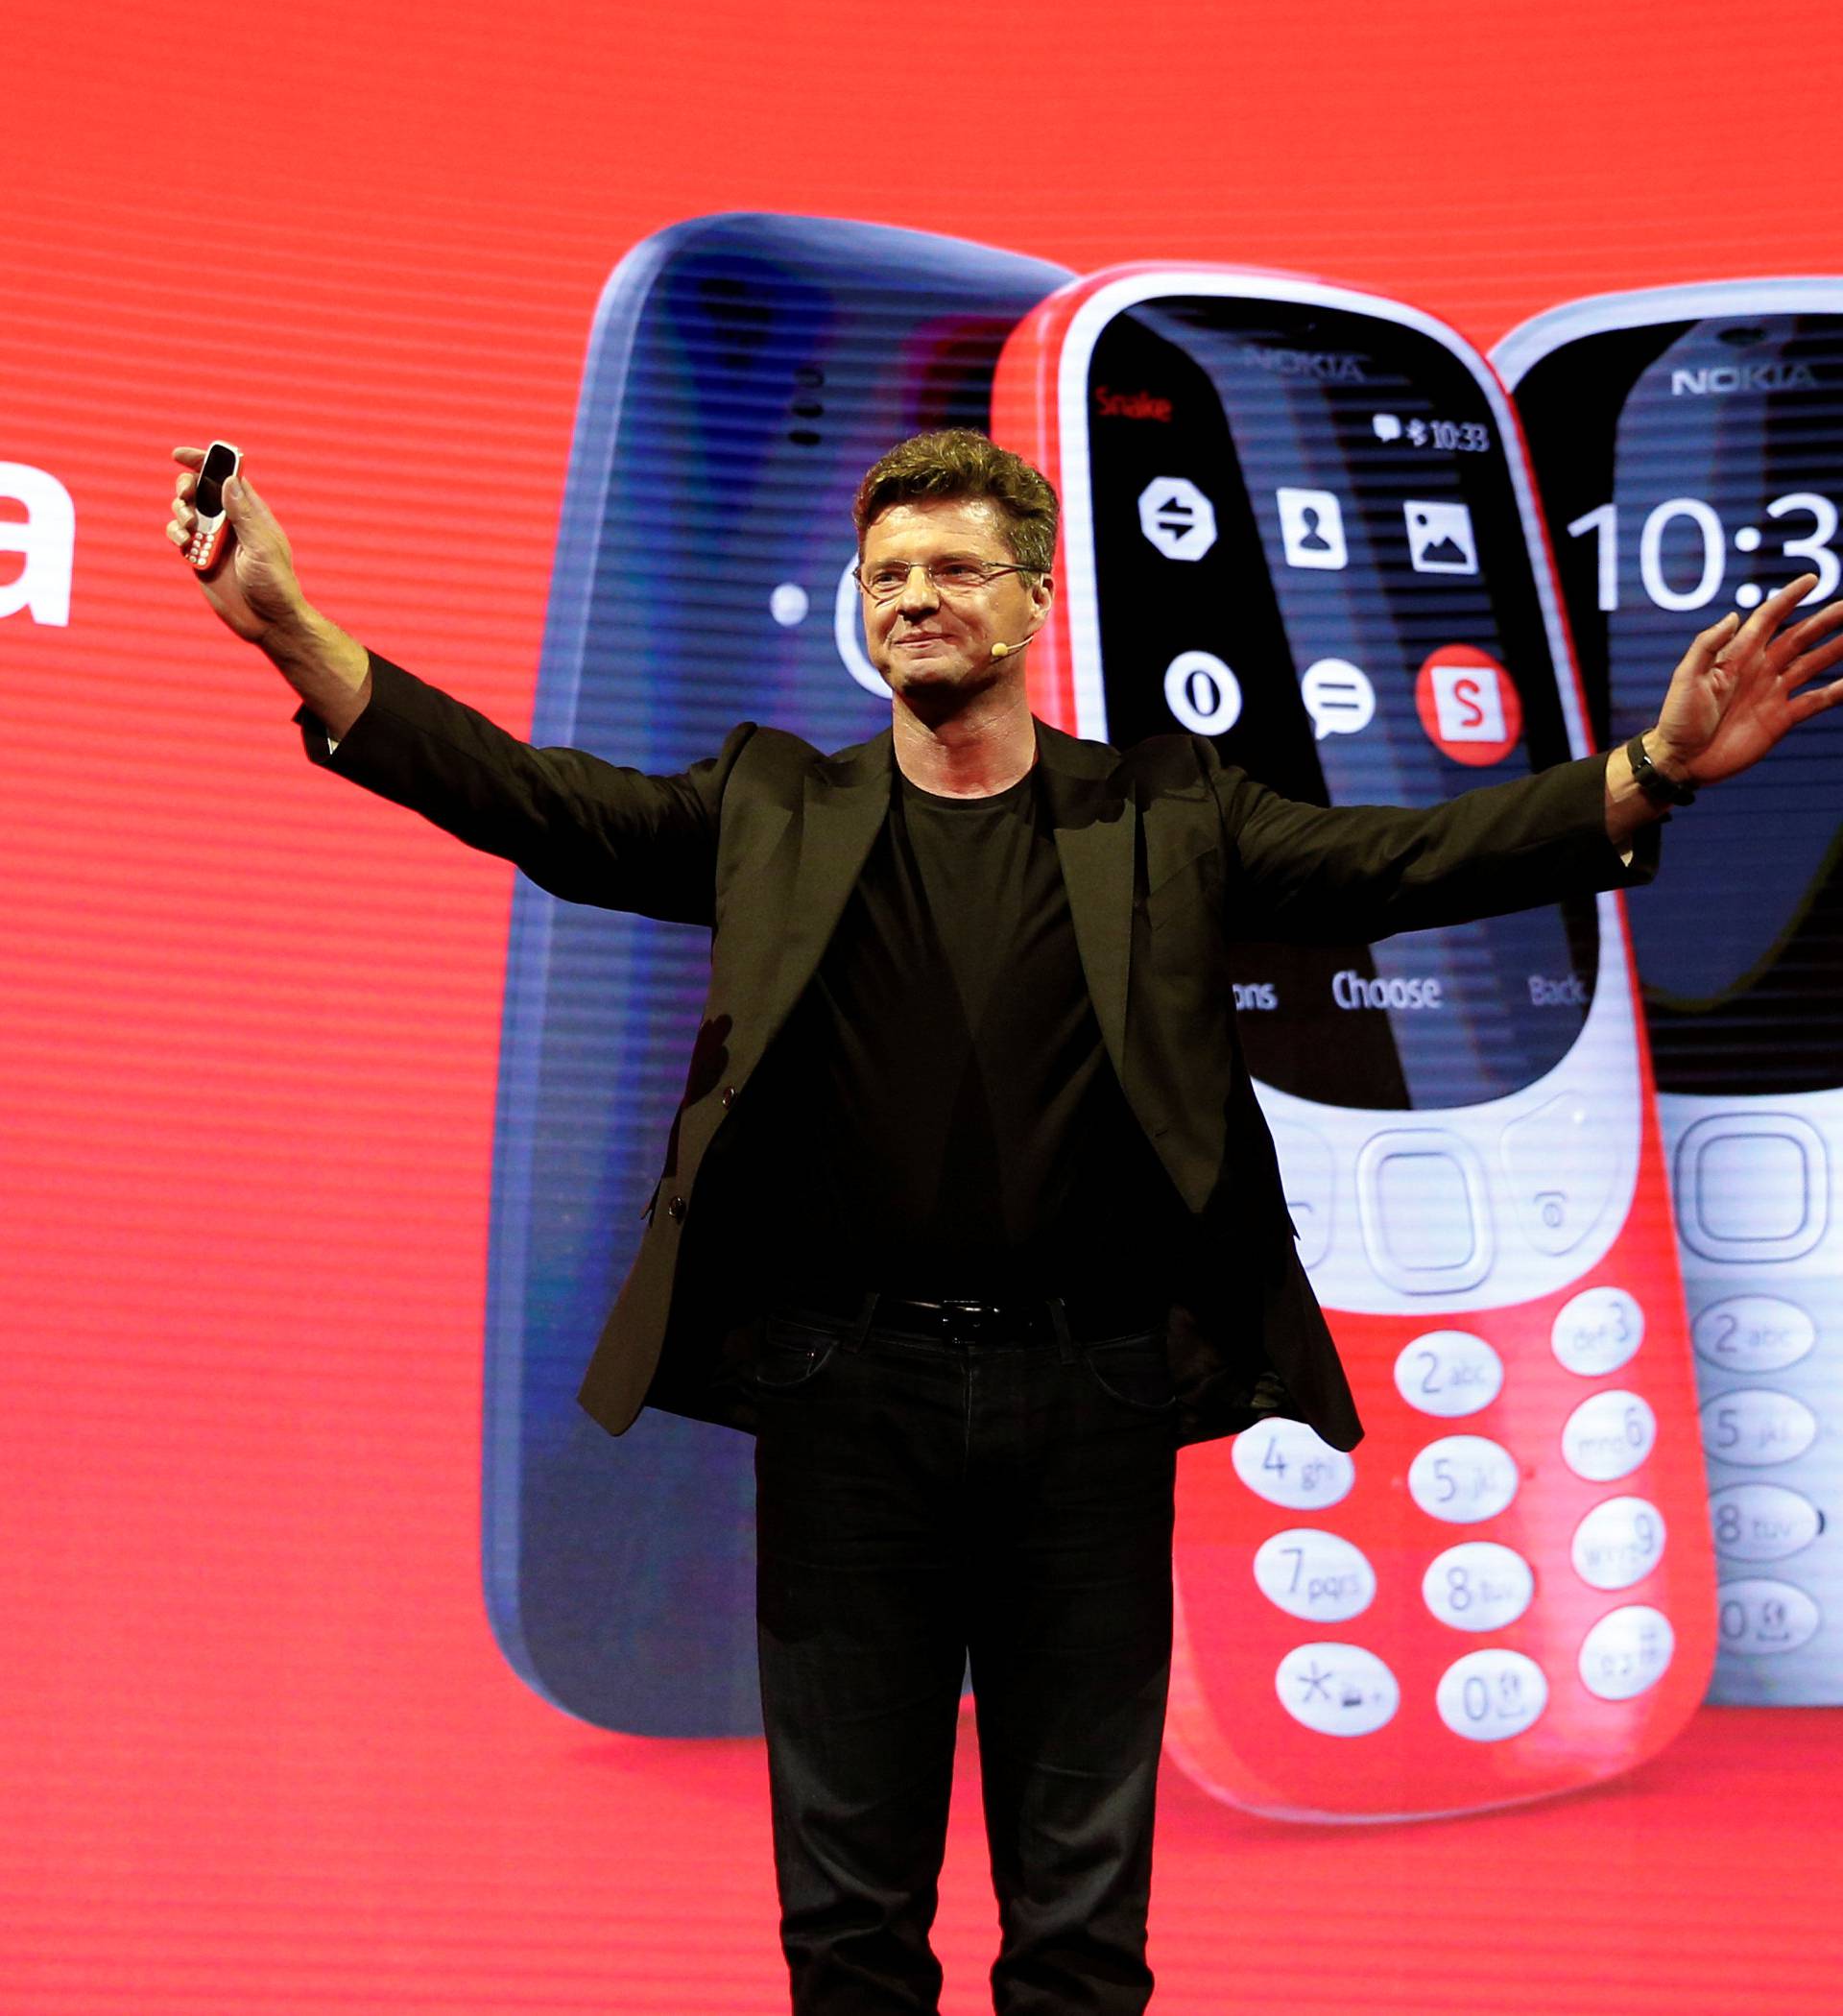 Nummela, CEO of Nokia-HMD, holds up Nokia 3310 device during presentation ceremony at Mobile World Congress in Barcelona